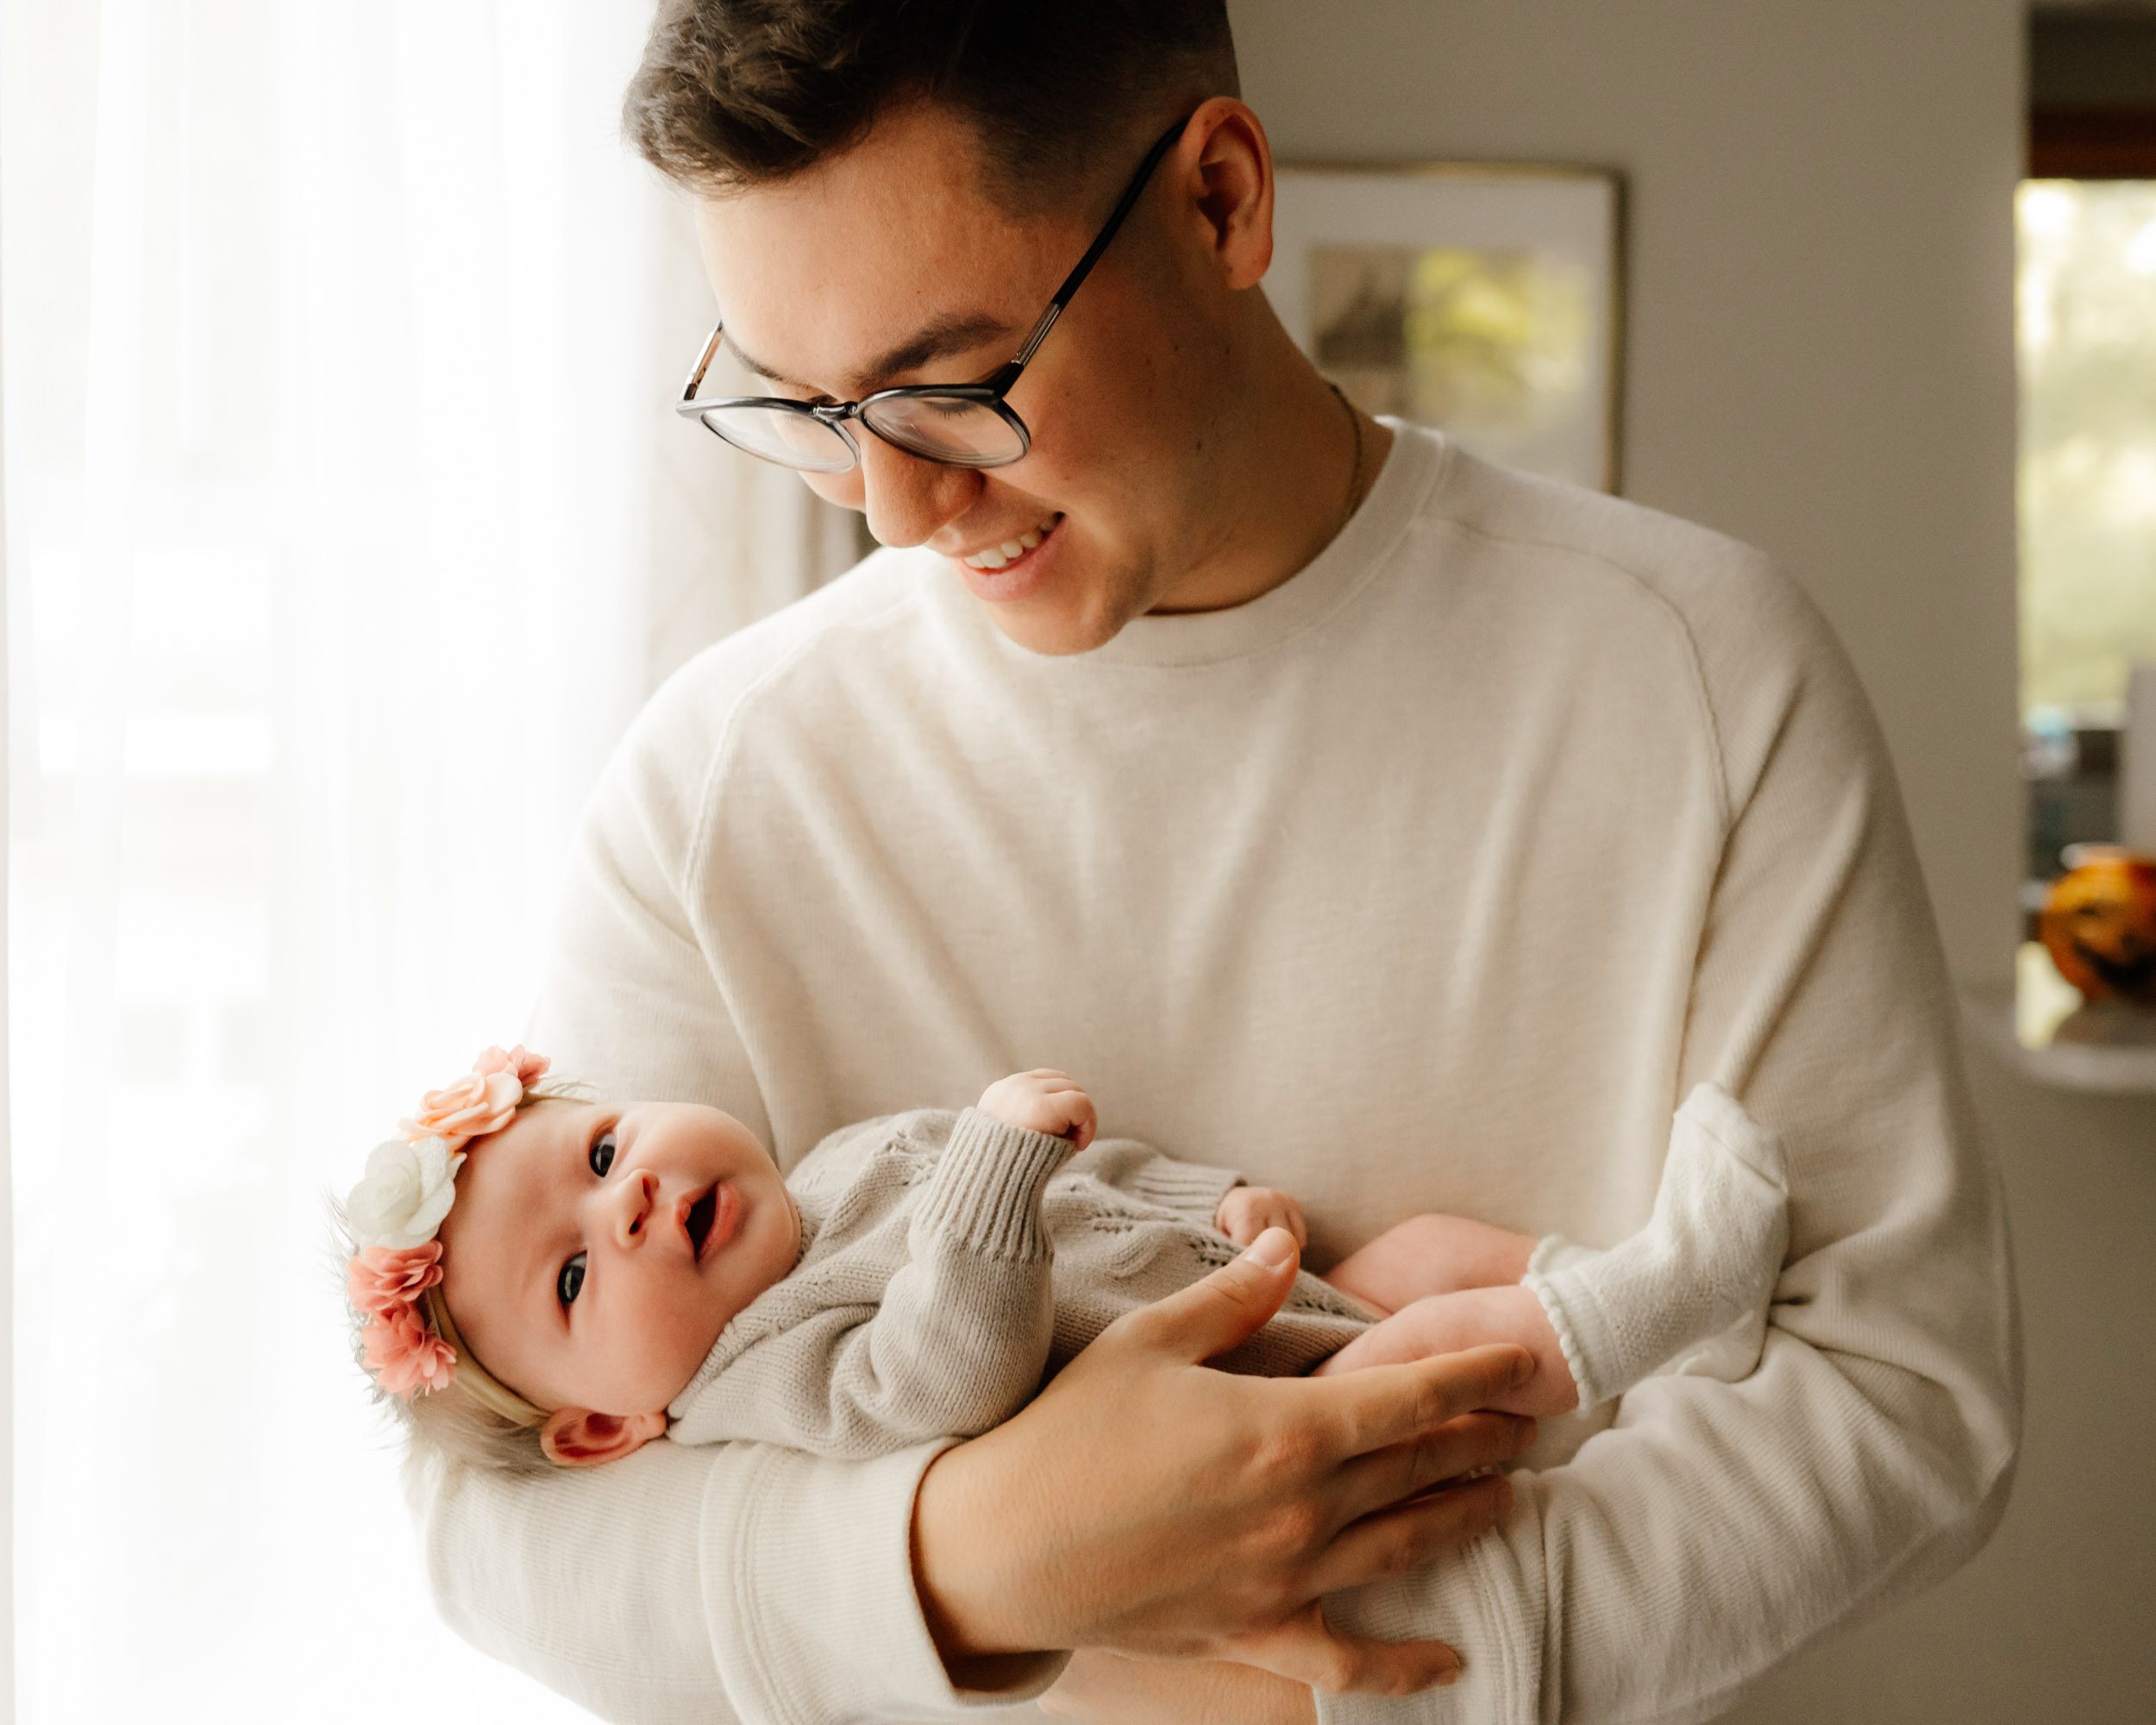 a new father cradling his baby girl in his arms and smiling down at her as she looks directly at the camera during a newborn photography session